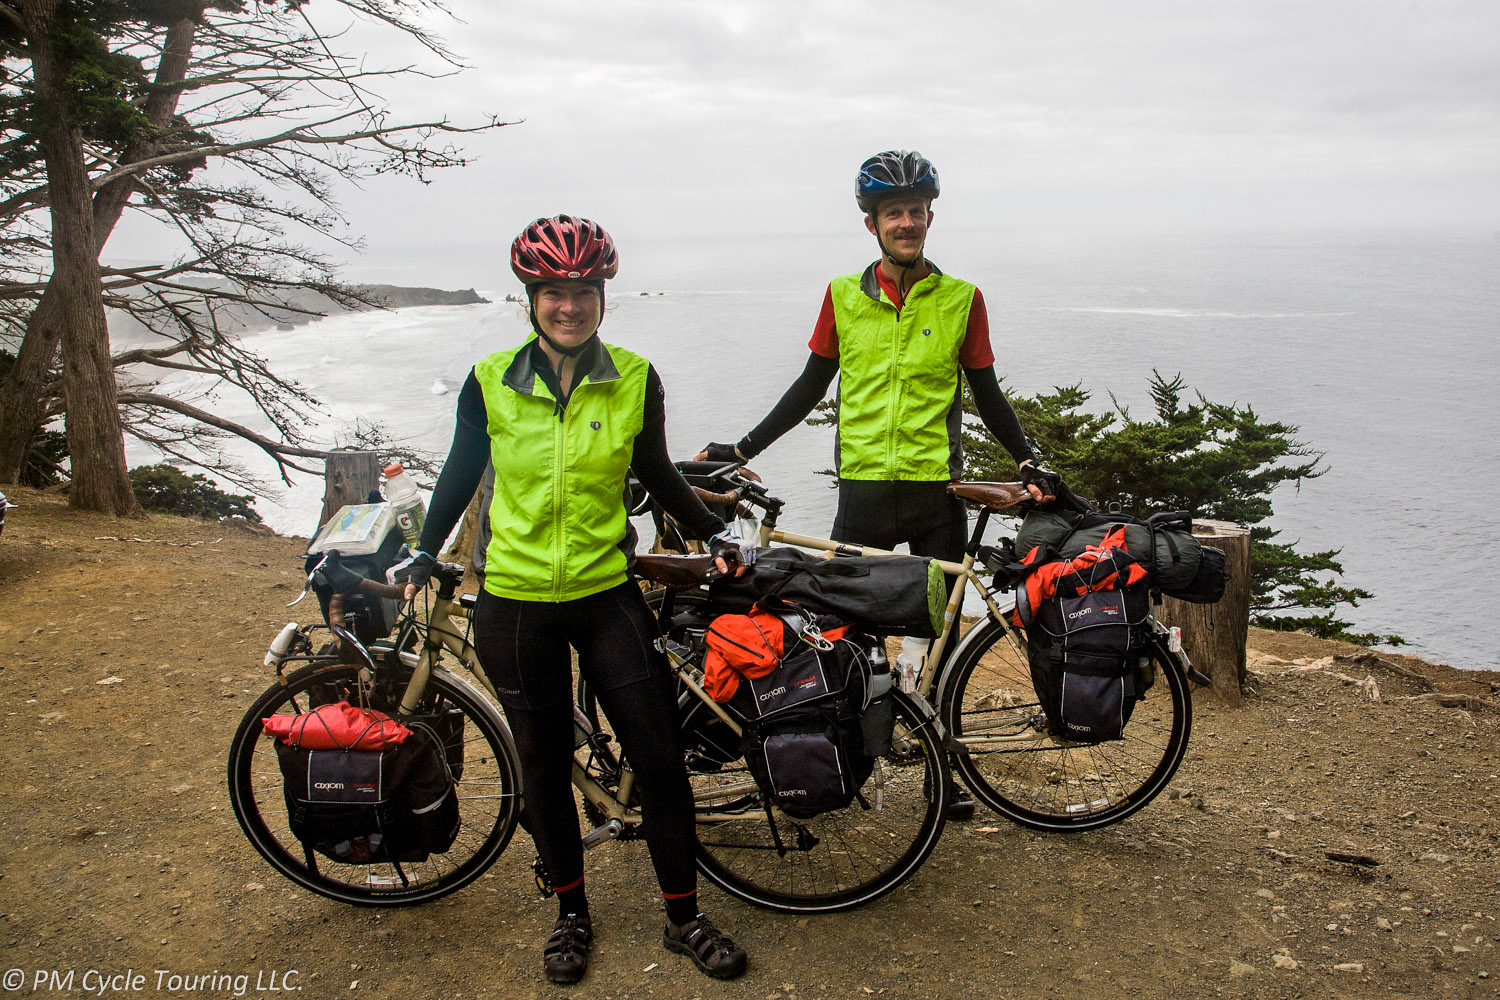 Two bicyclists and their bicycles and gear overlooking the ocean